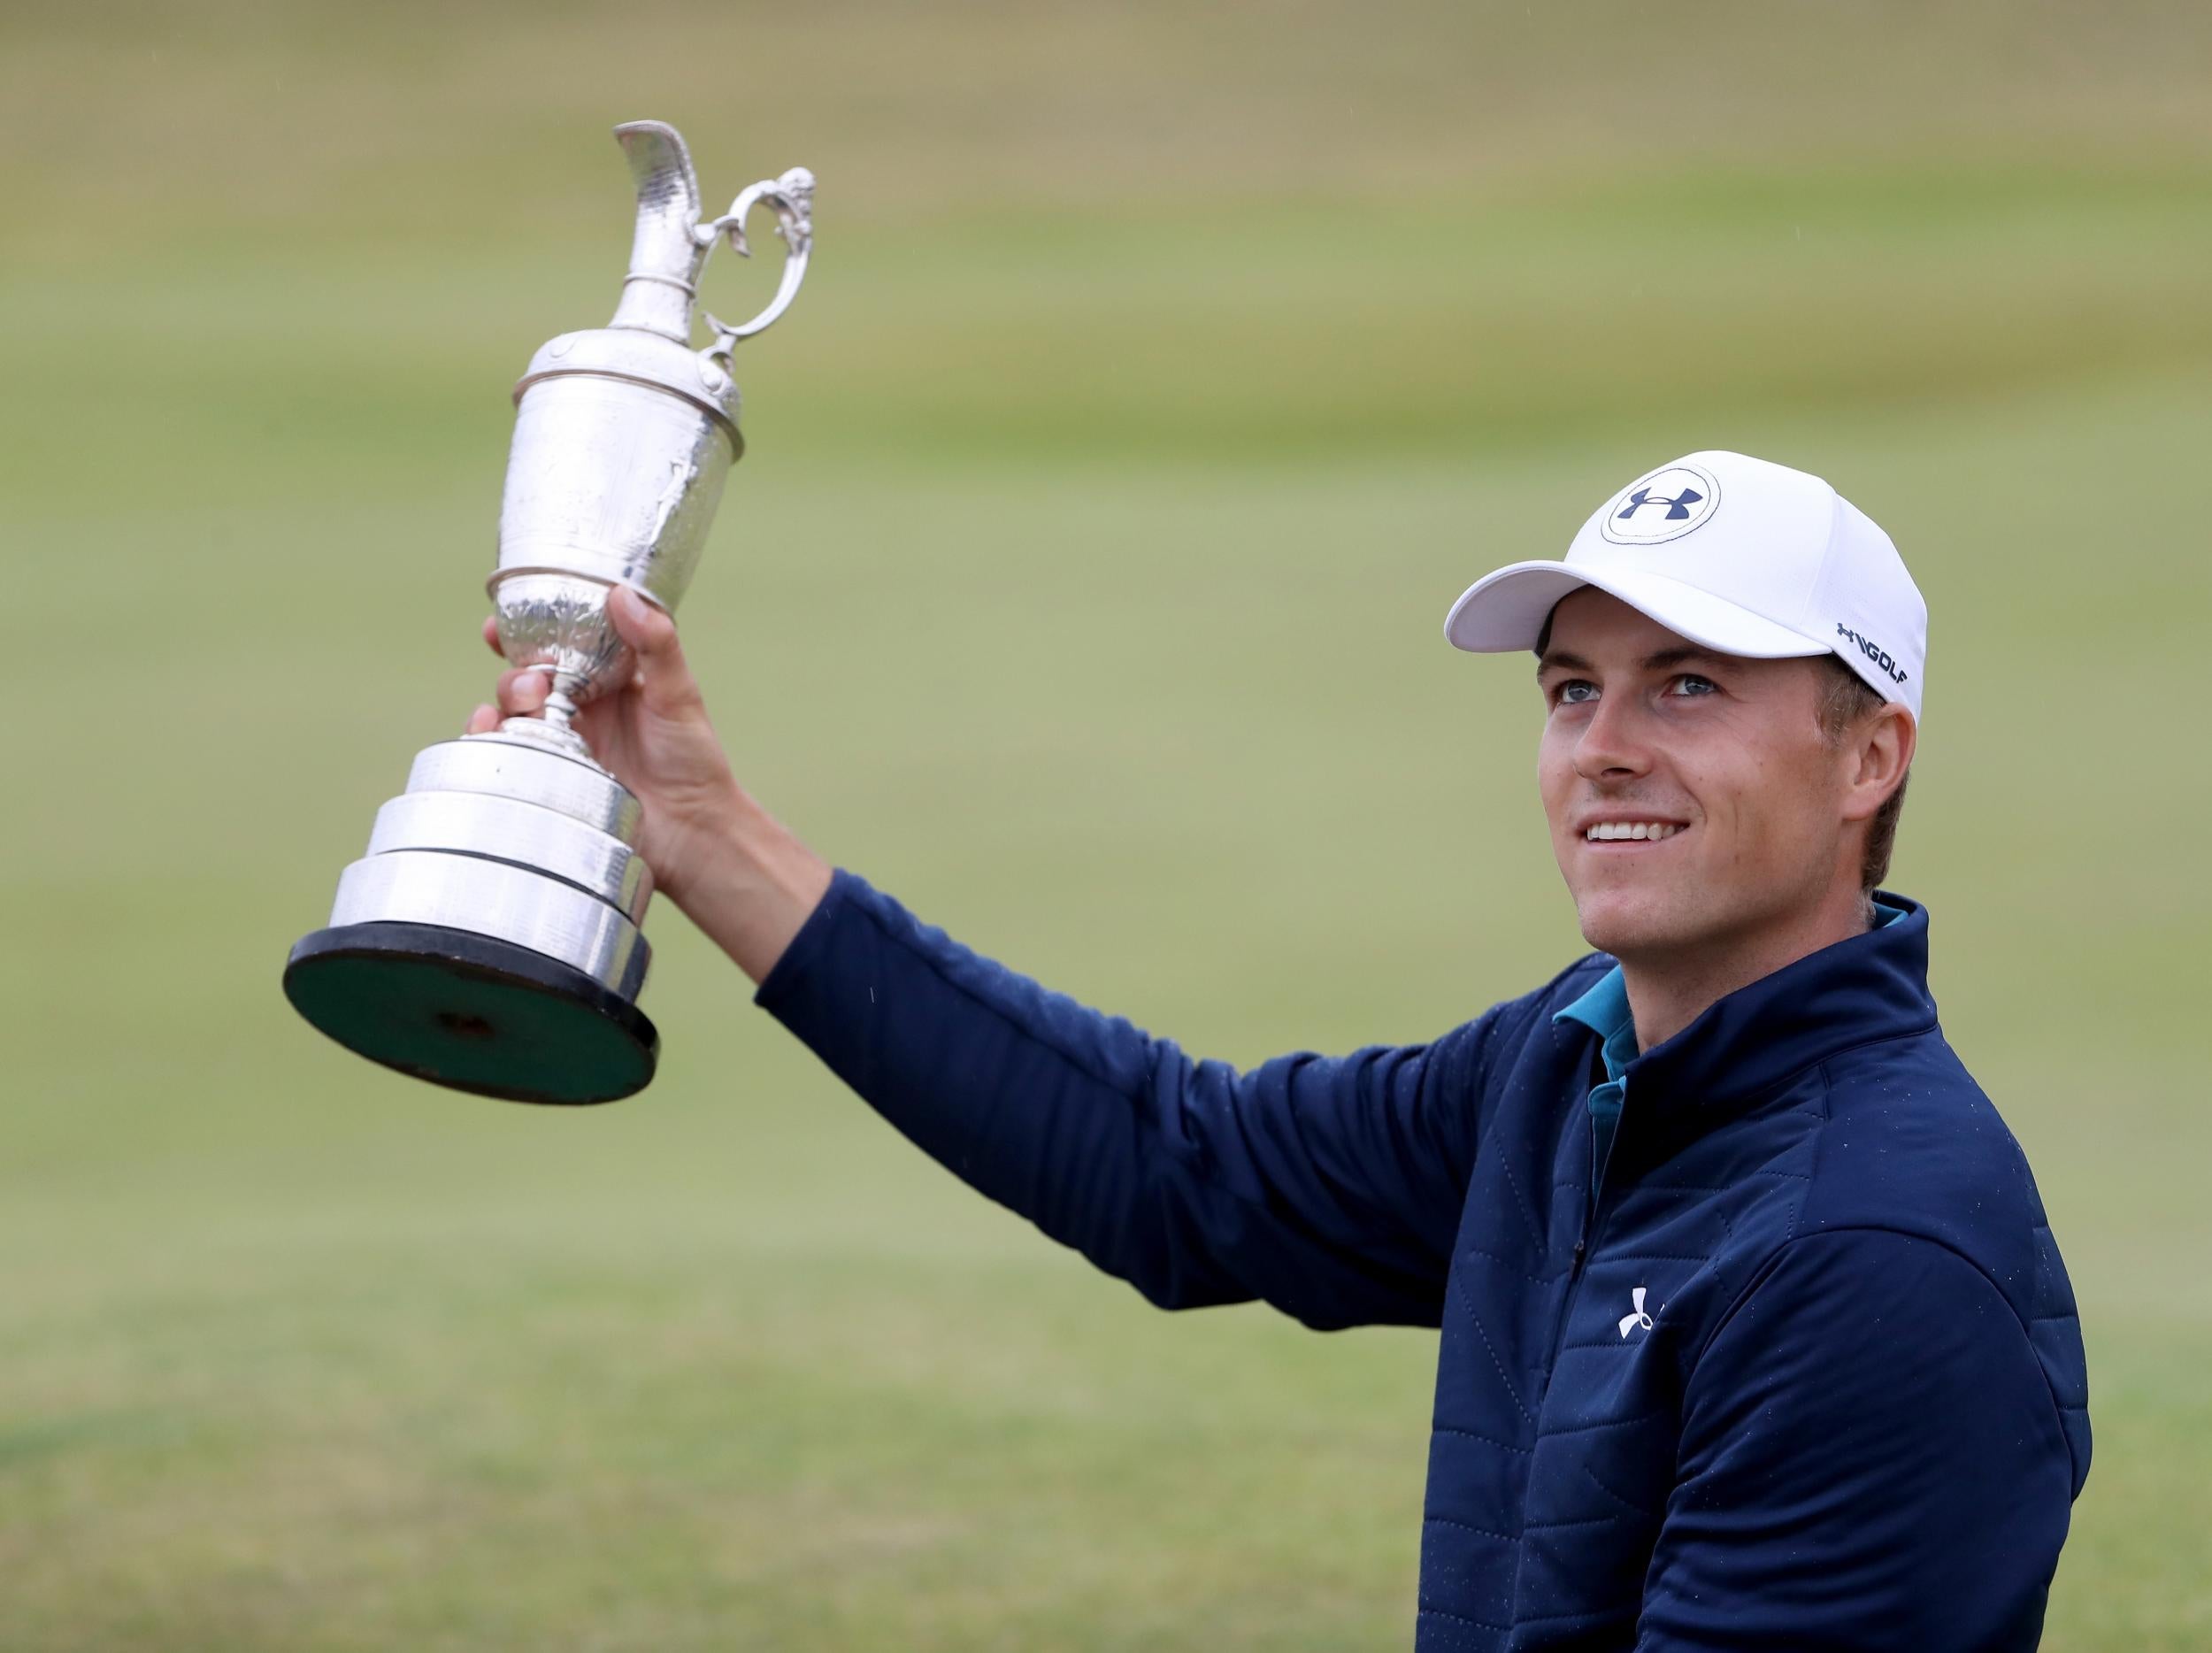 Jordan Spieth weathers the storm to claim first Open title in dramatic